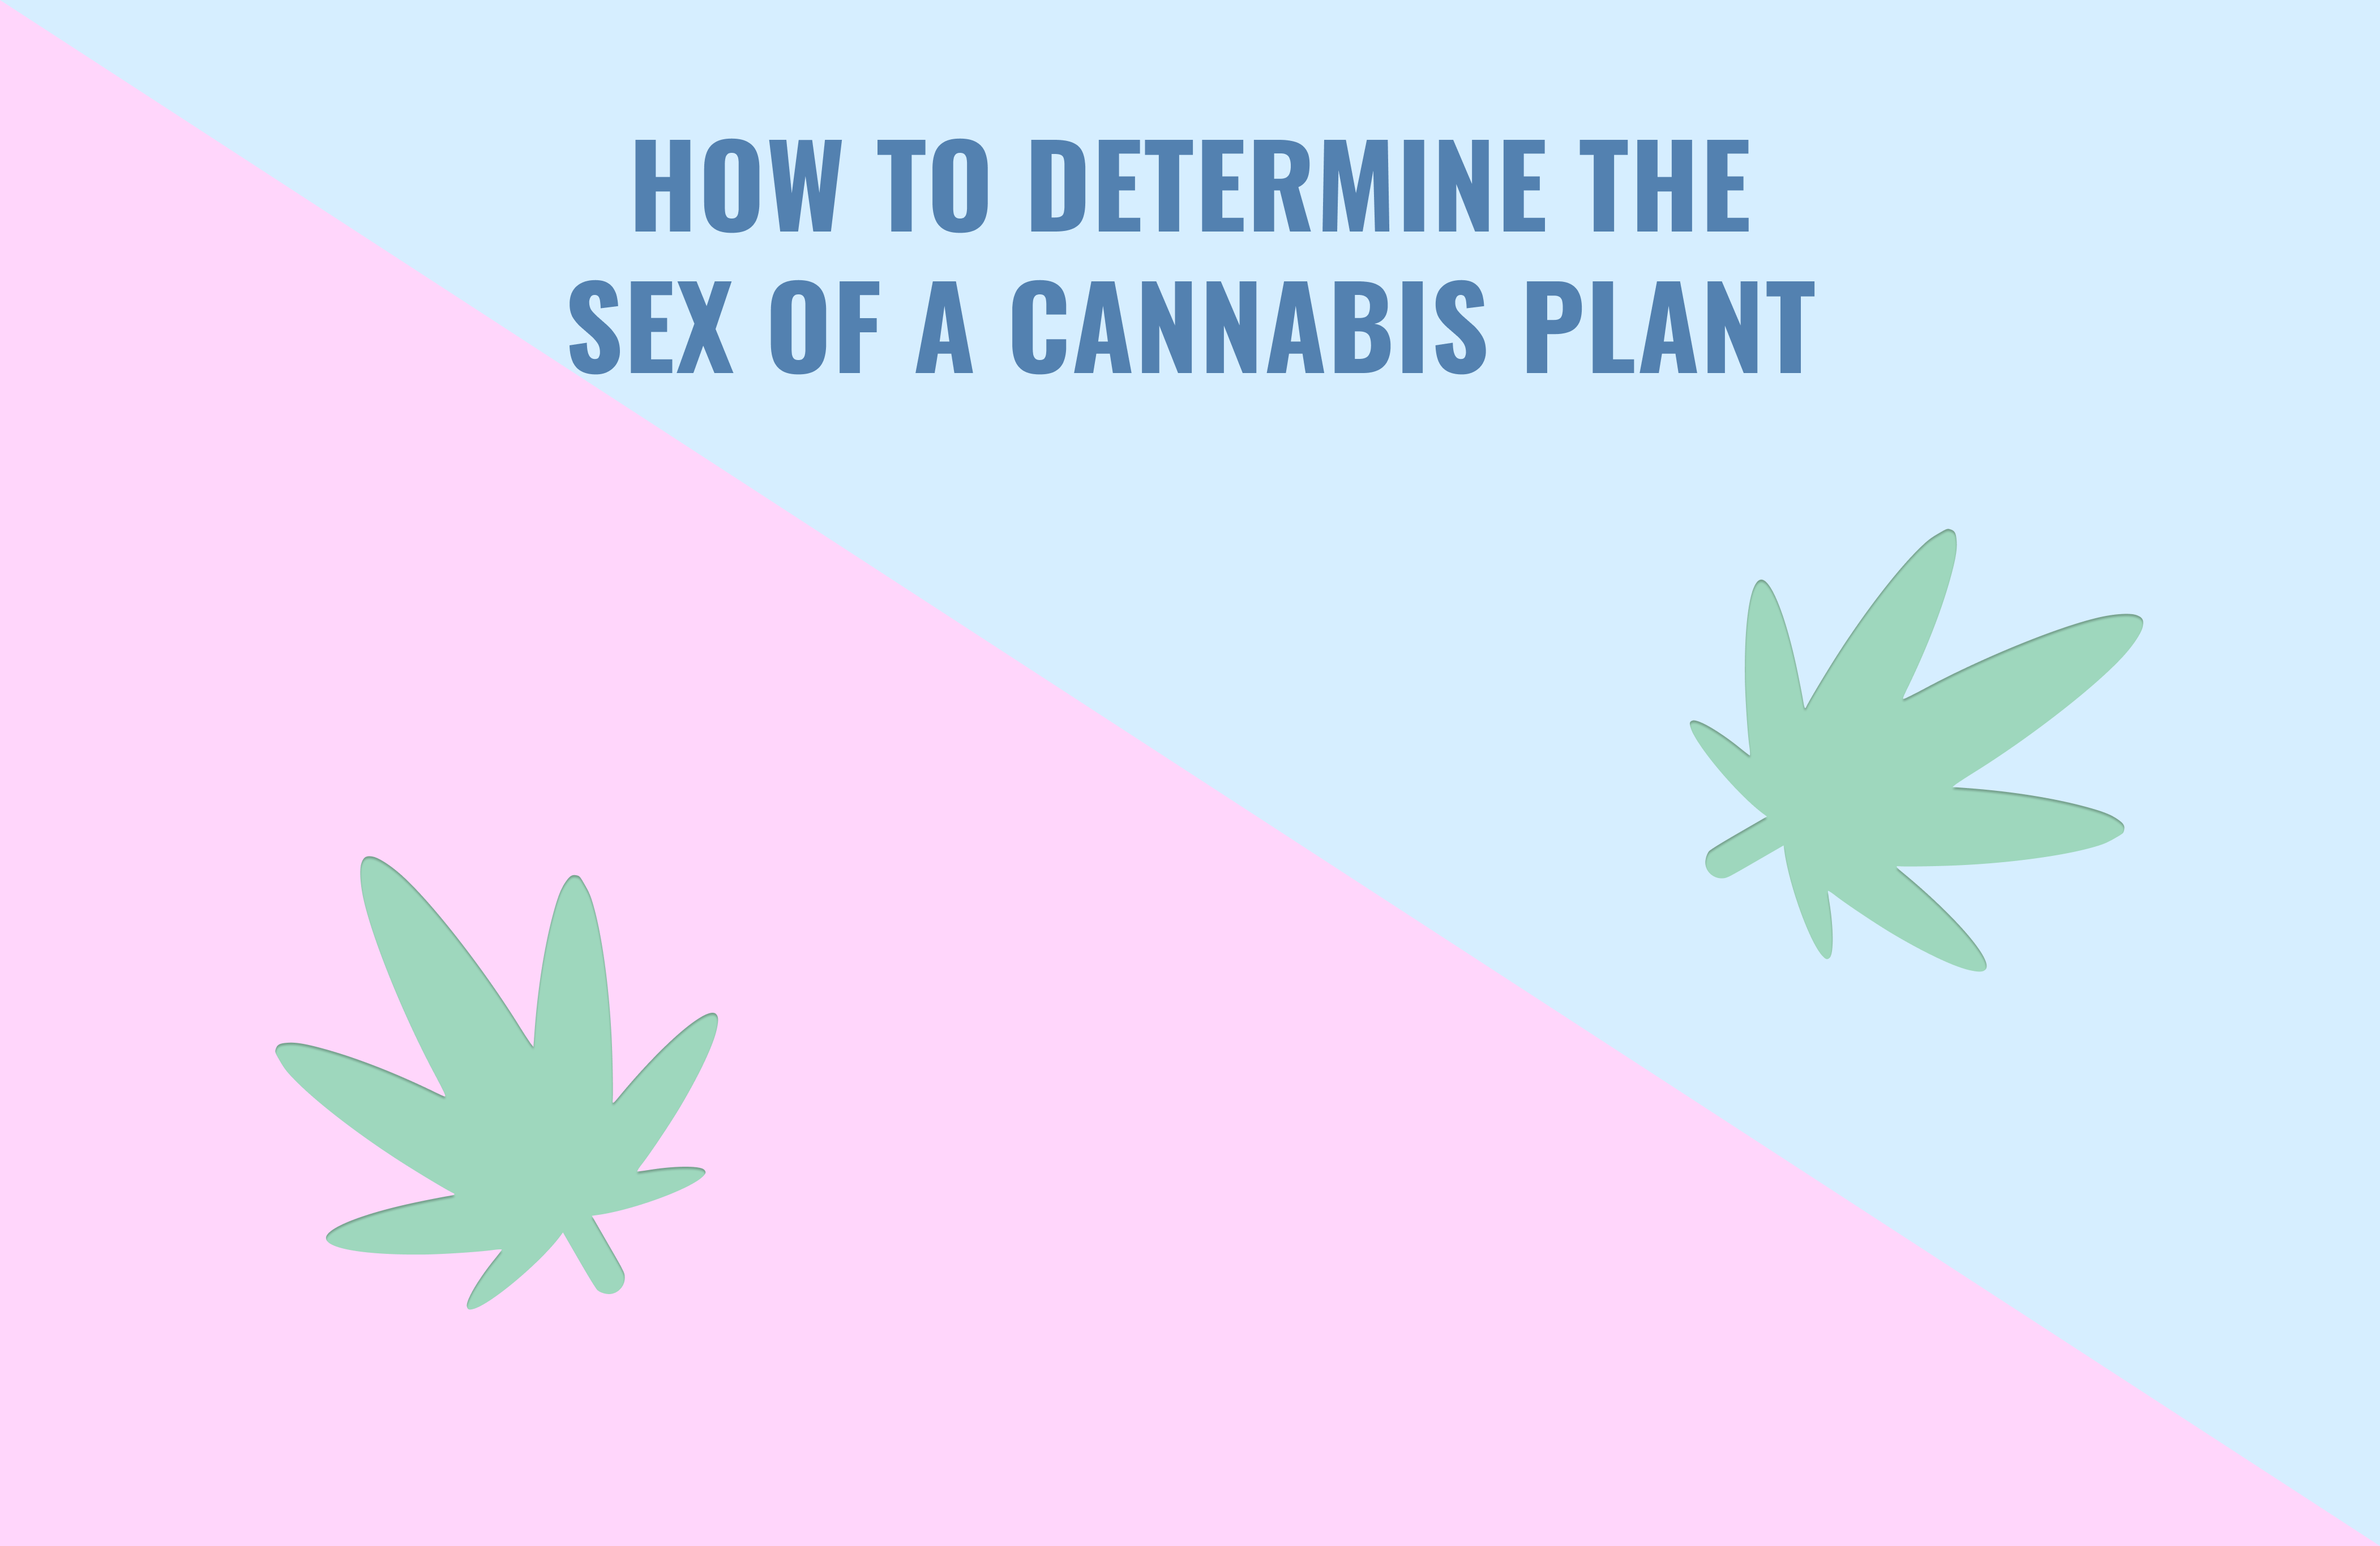 How To Determine The Sex Of A Cannabis Plant